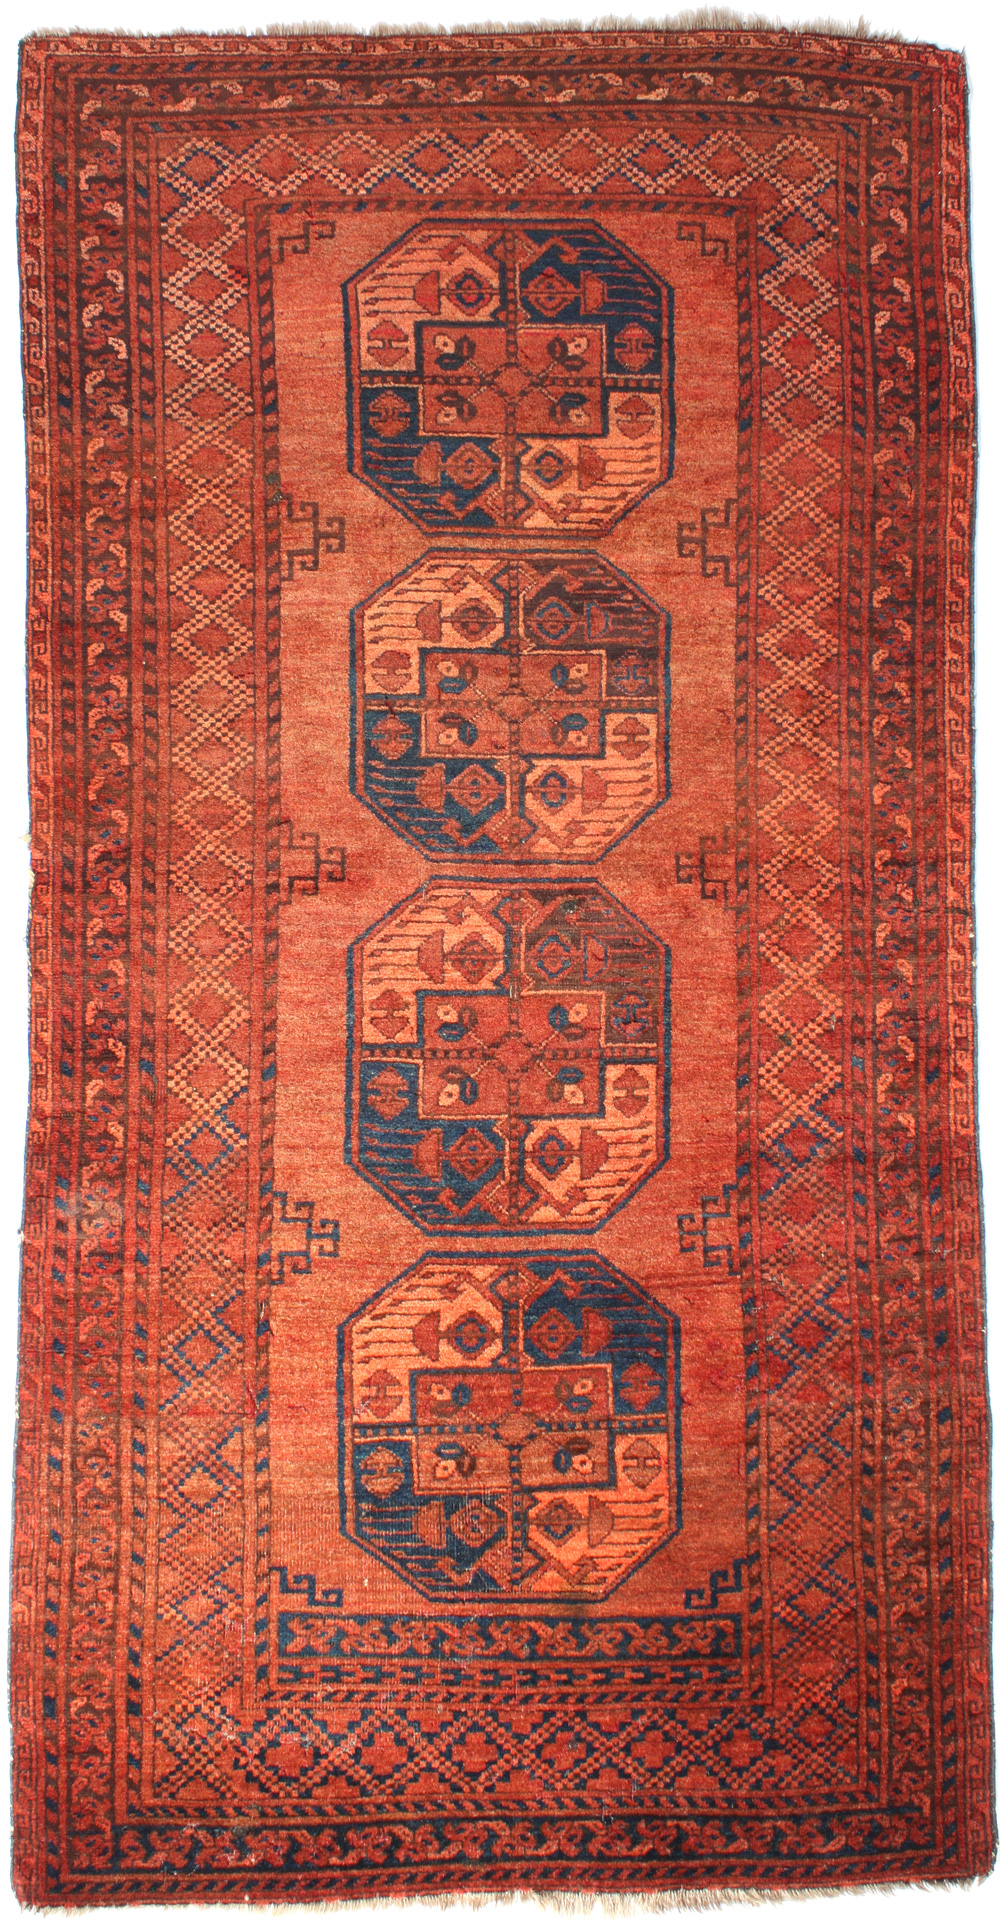 Antique Afghan Carpet from Northern Afghanistan - Ersari main carpet with octagon Taghan guls - Back To List of Oriental Carpets and Rugs